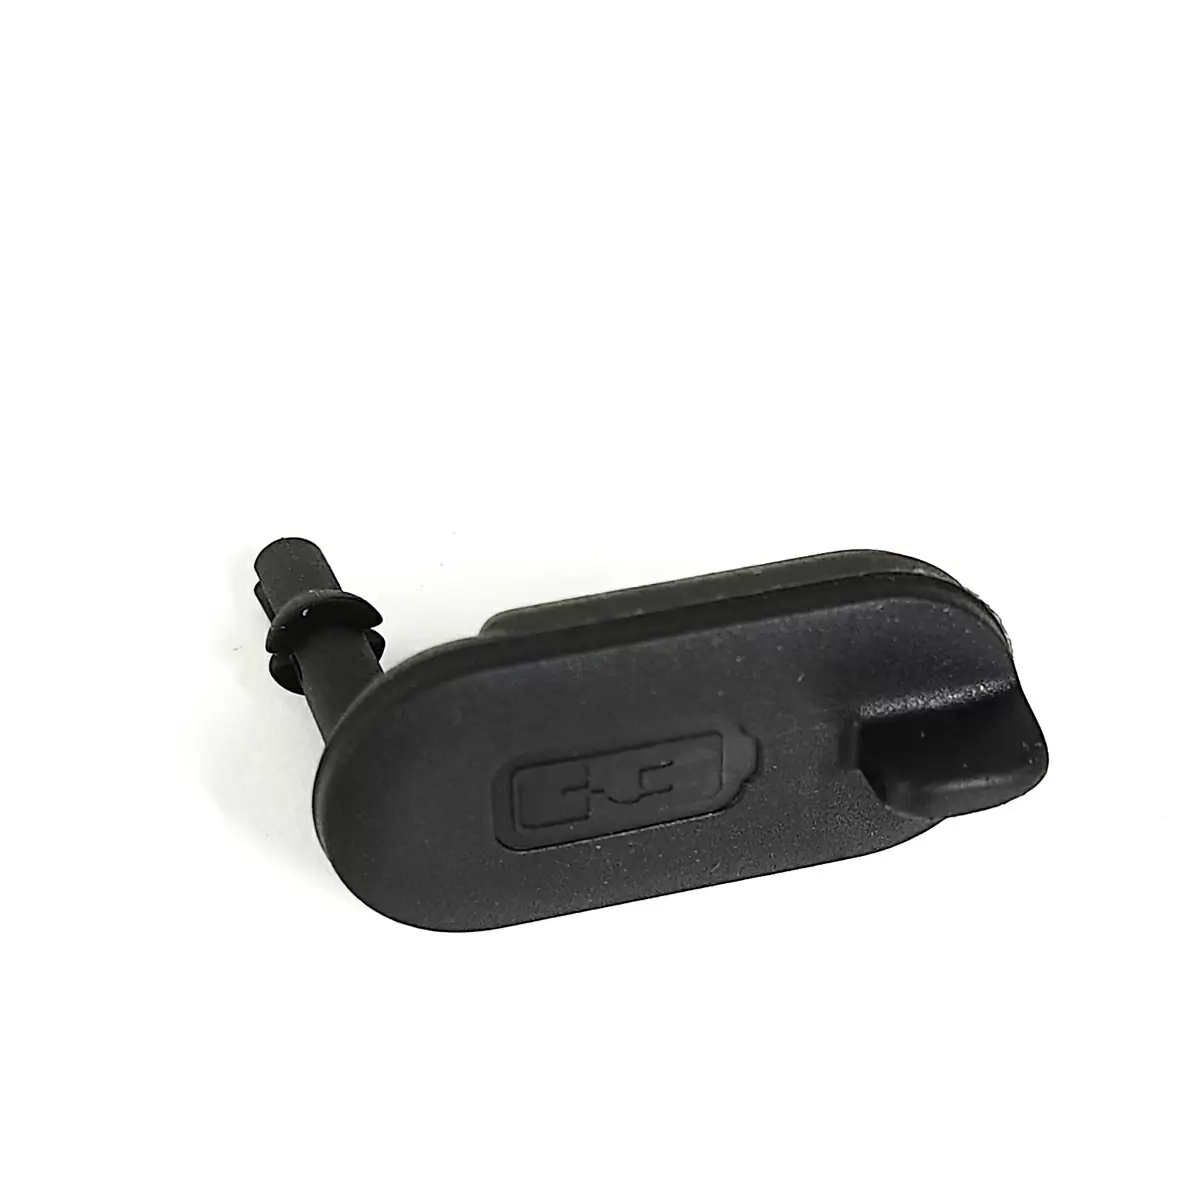 Replacement battery cap for Hyper T970 models - image